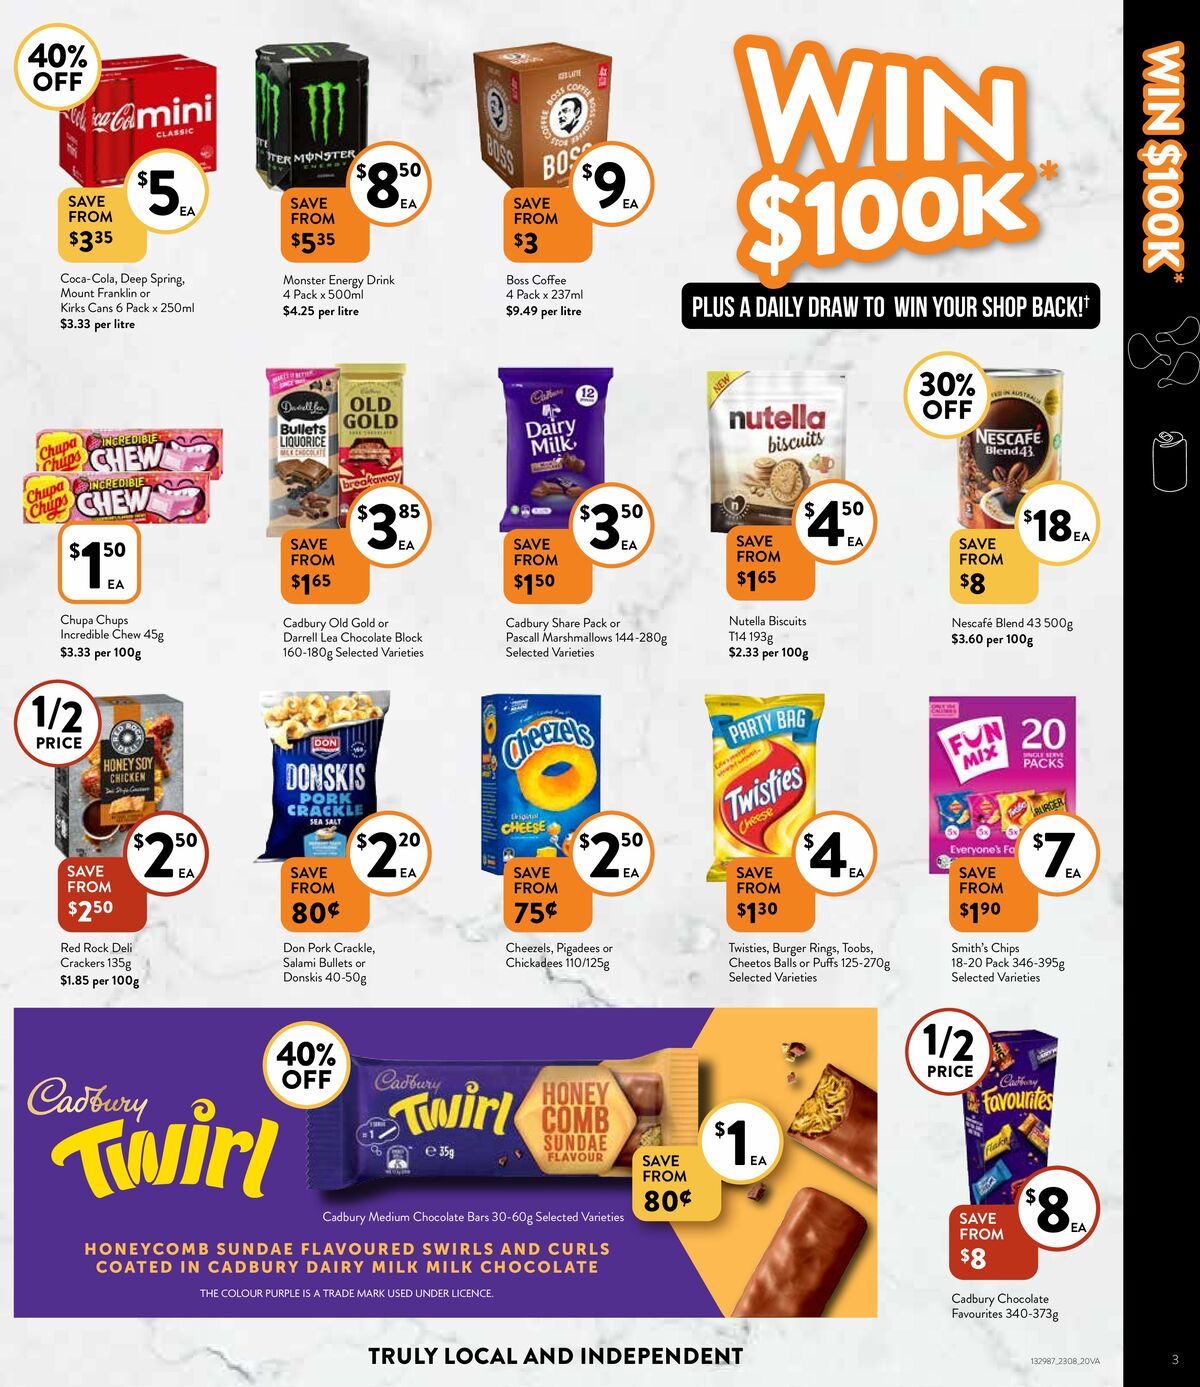 FoodWorks Supermarket Catalogues from 23 August